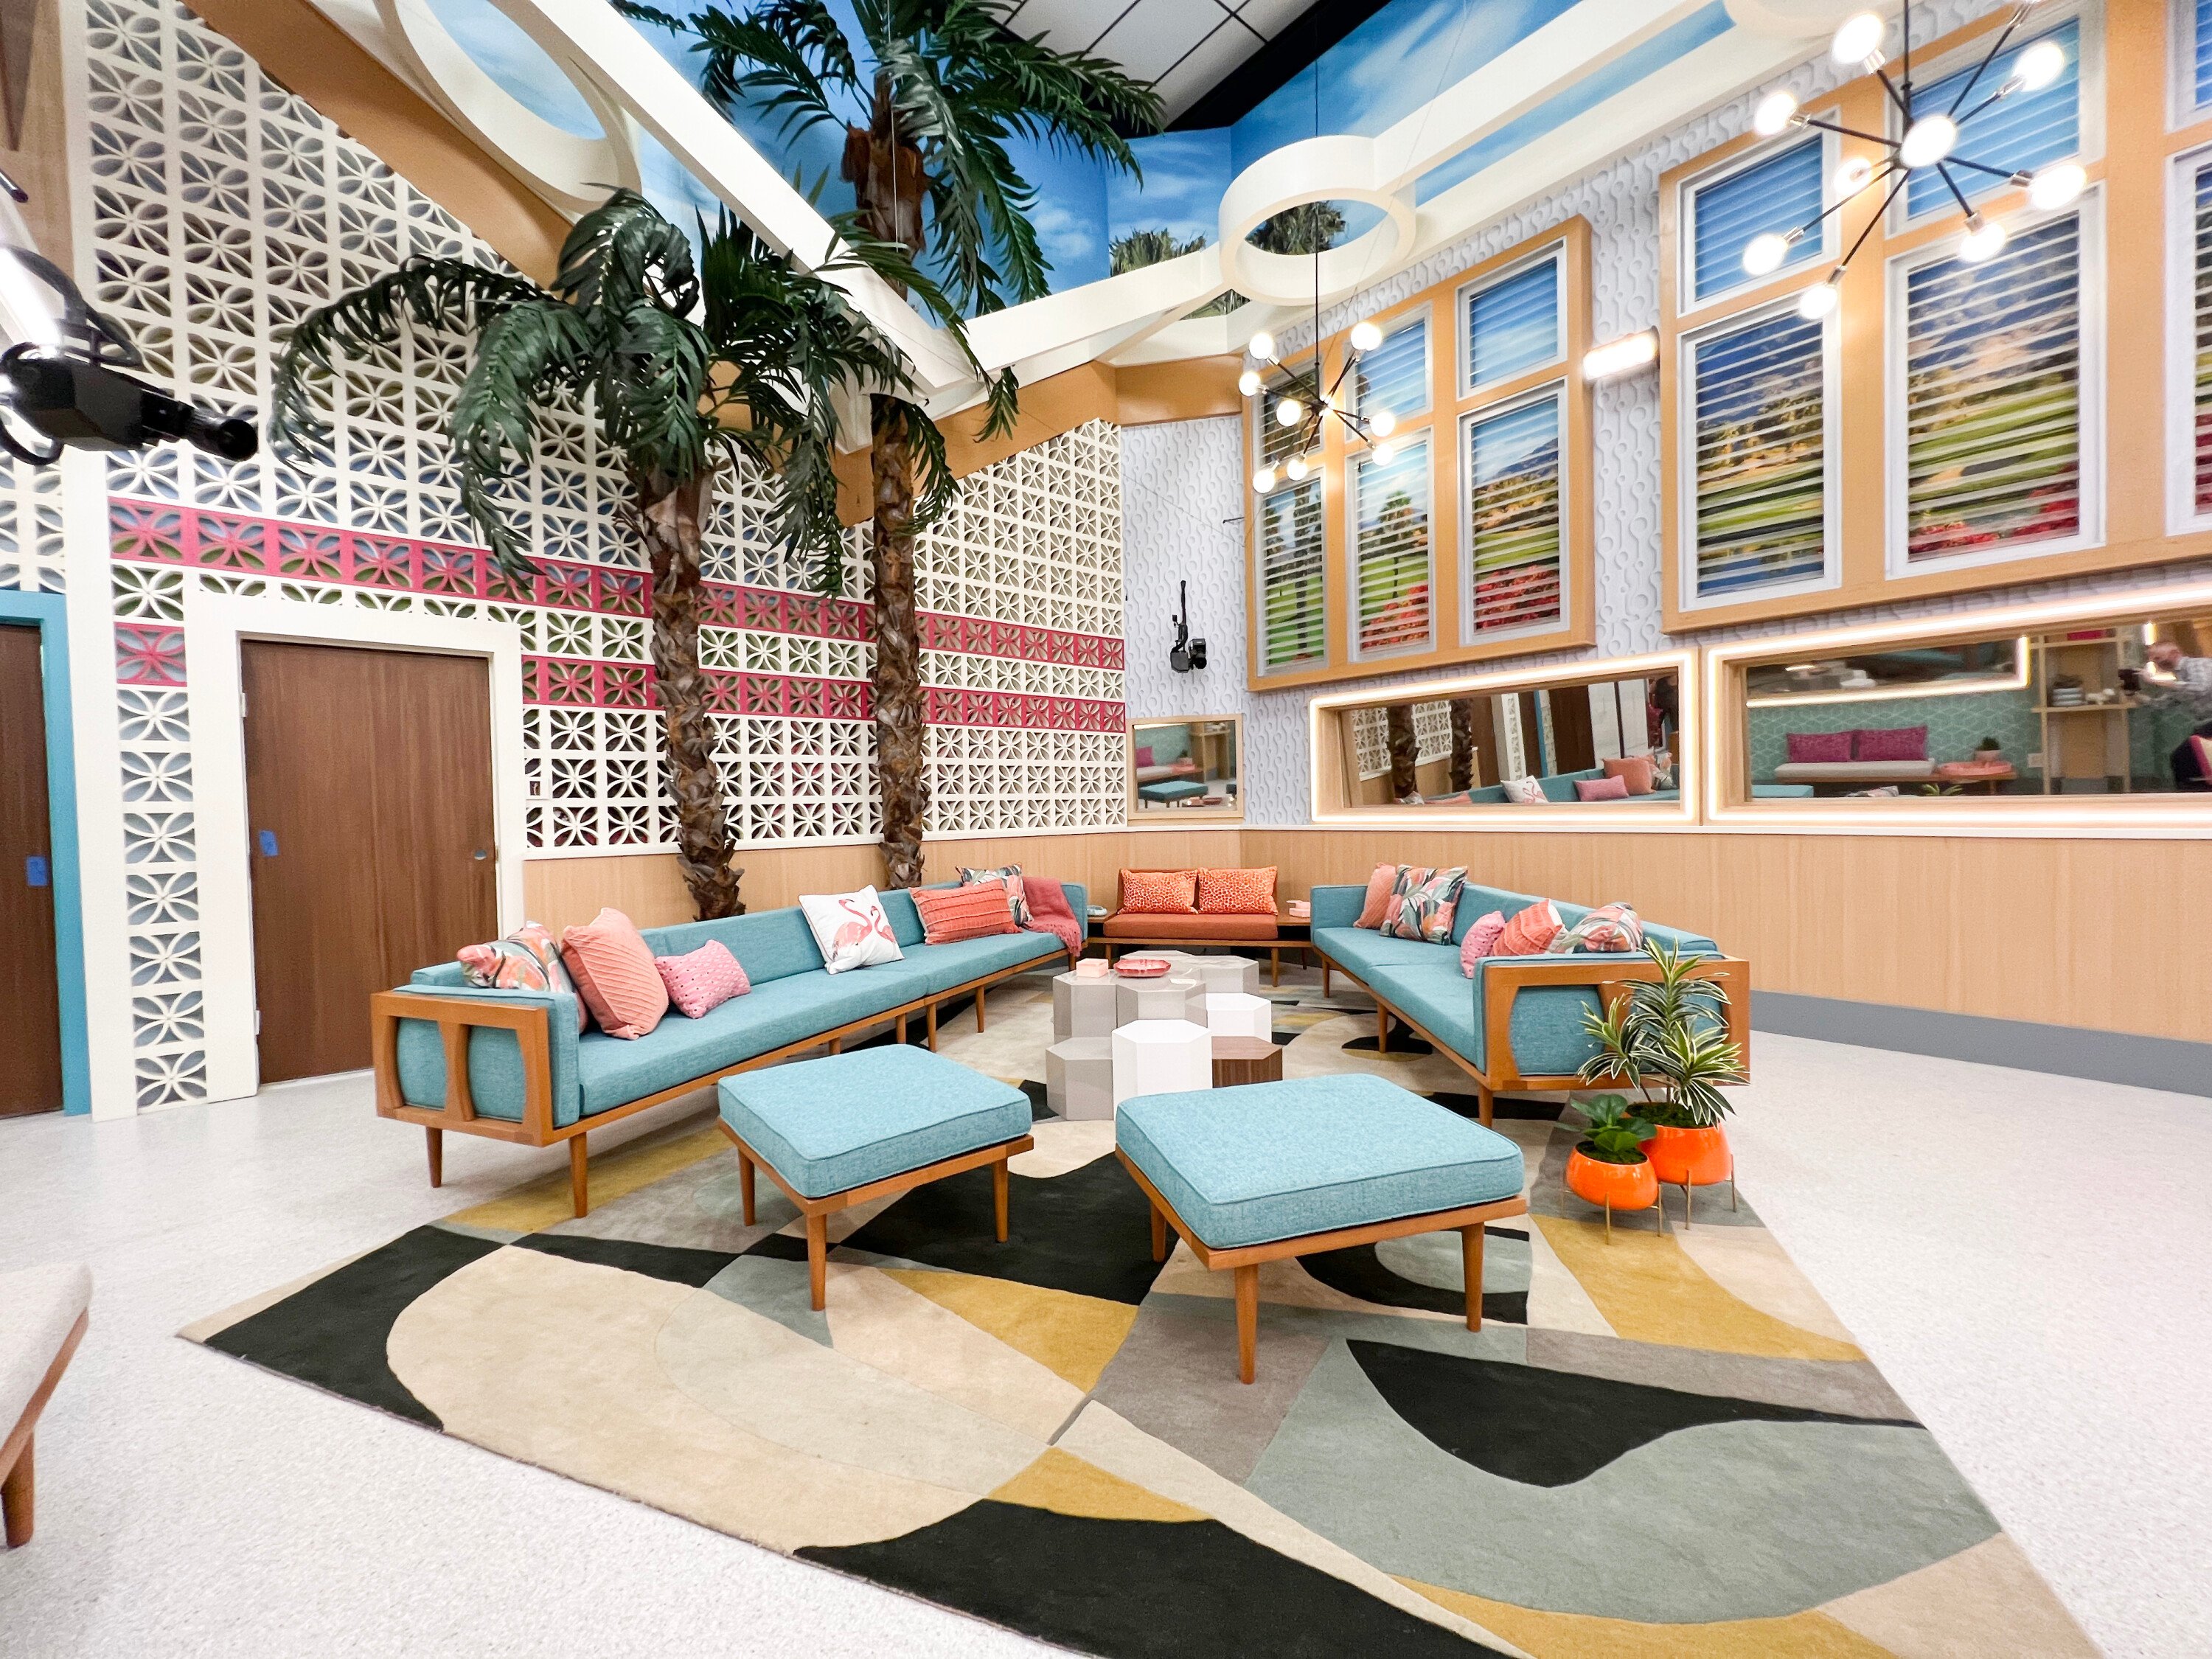 The living room of the 'Big Brother 24' house, which features fake palm trees, retro blue couches, and coral colored pillows.